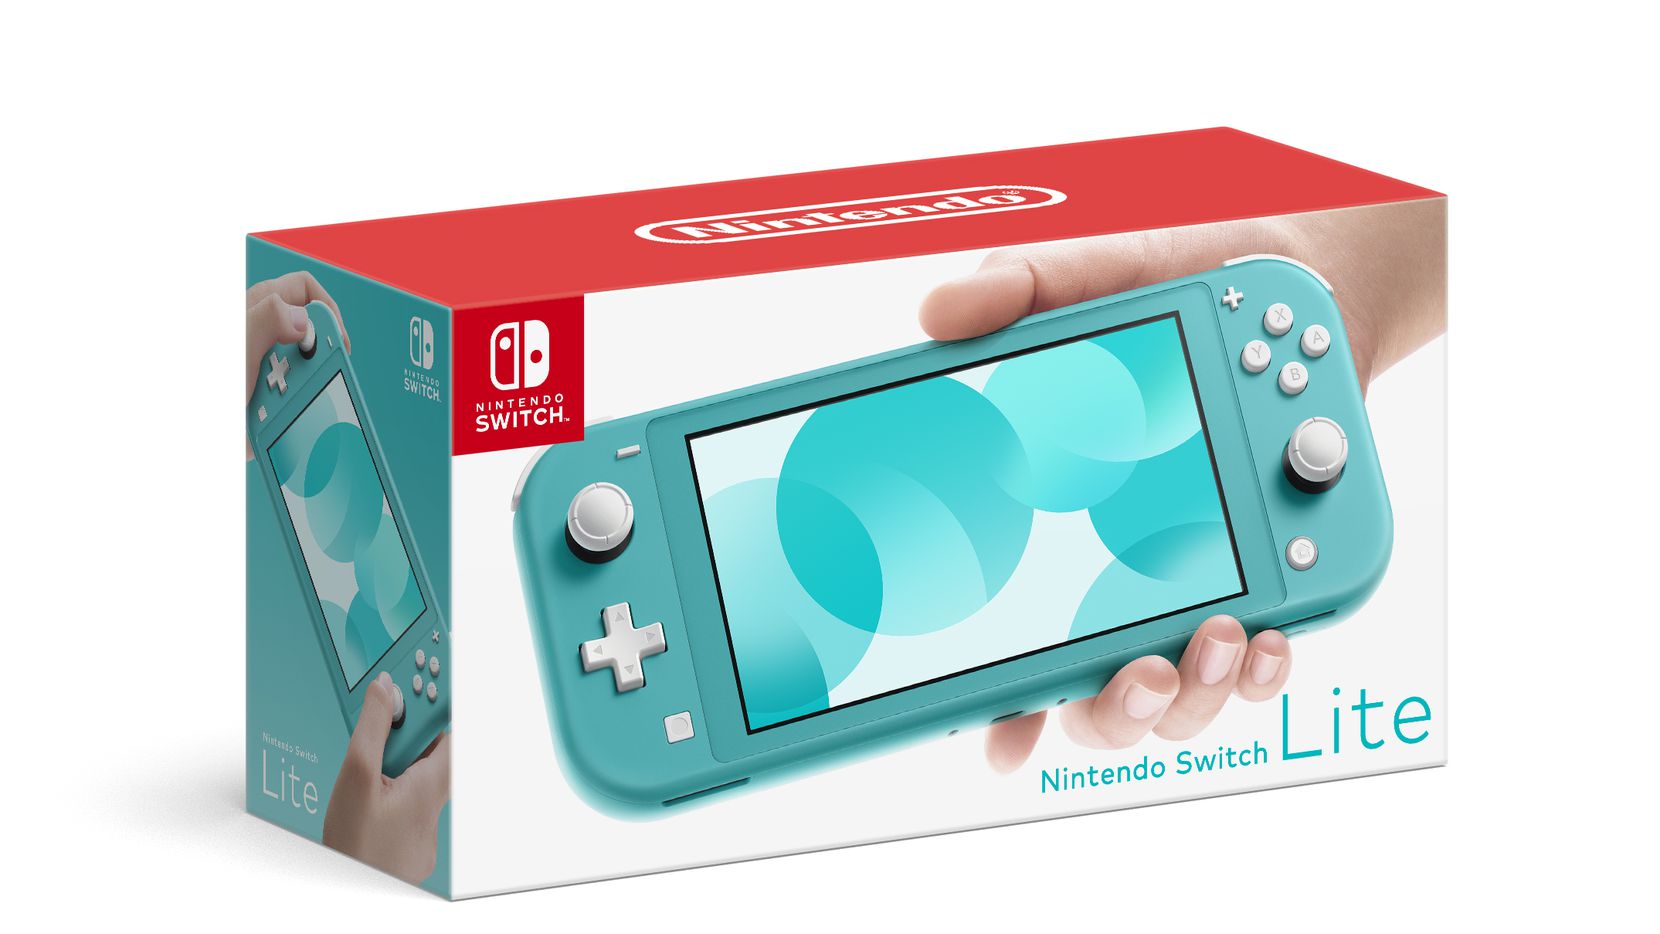 Nintendos New Switch Lite Is An Almost Perfect Gaming